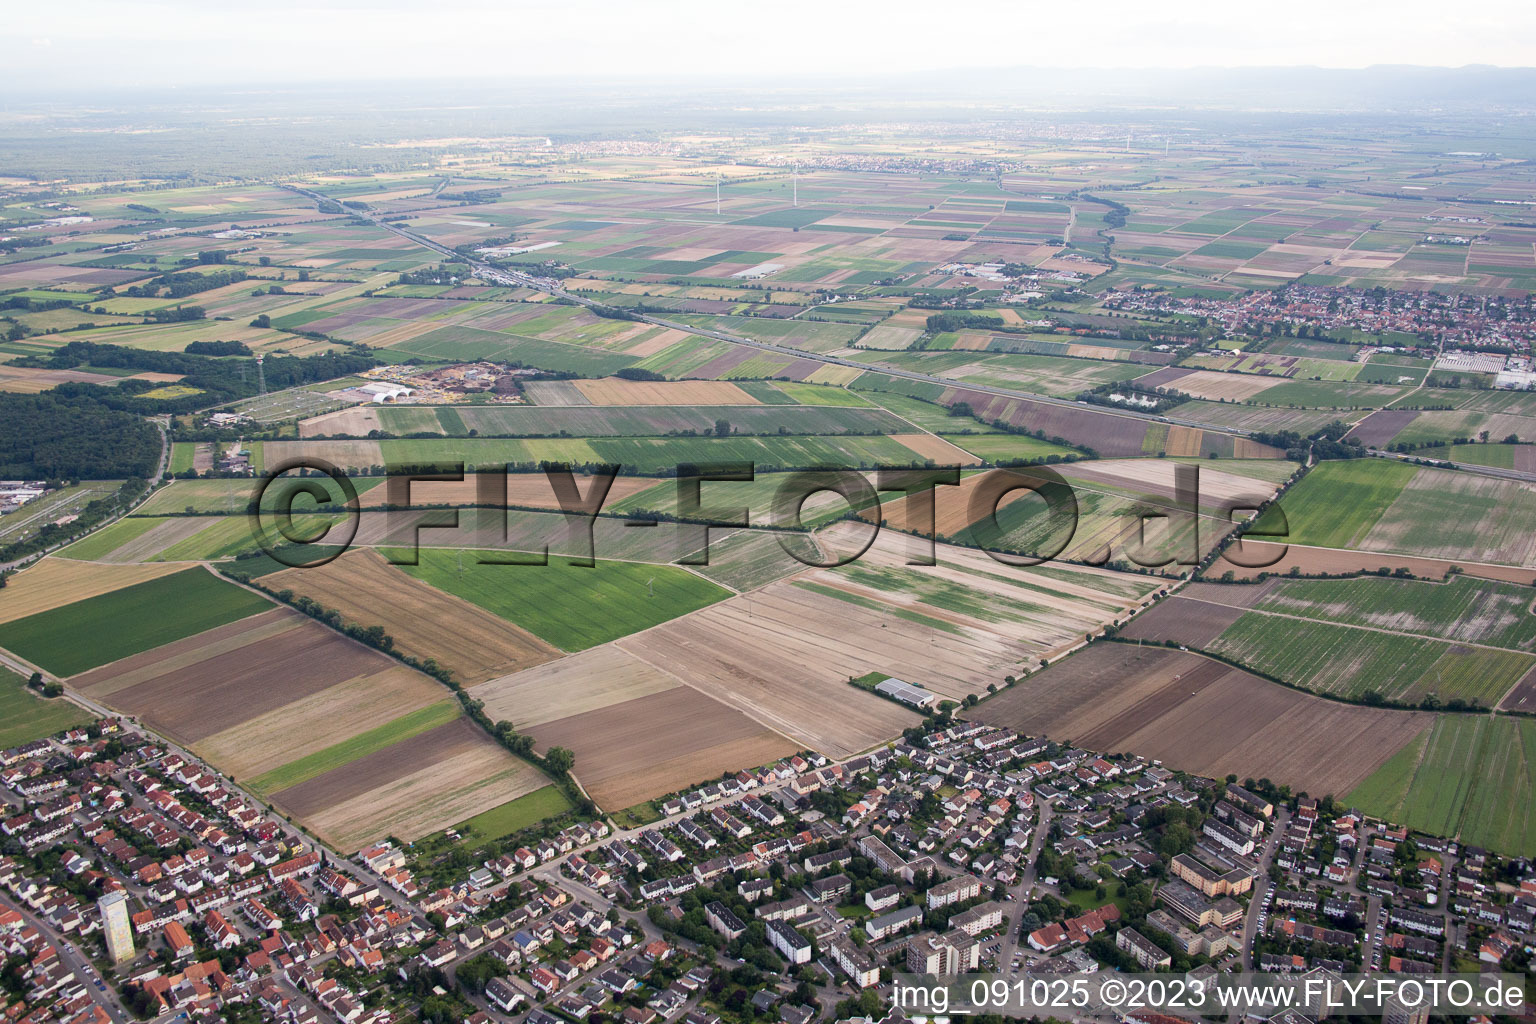 Aerial view of Mutterstadt in the state Rhineland-Palatinate, Germany